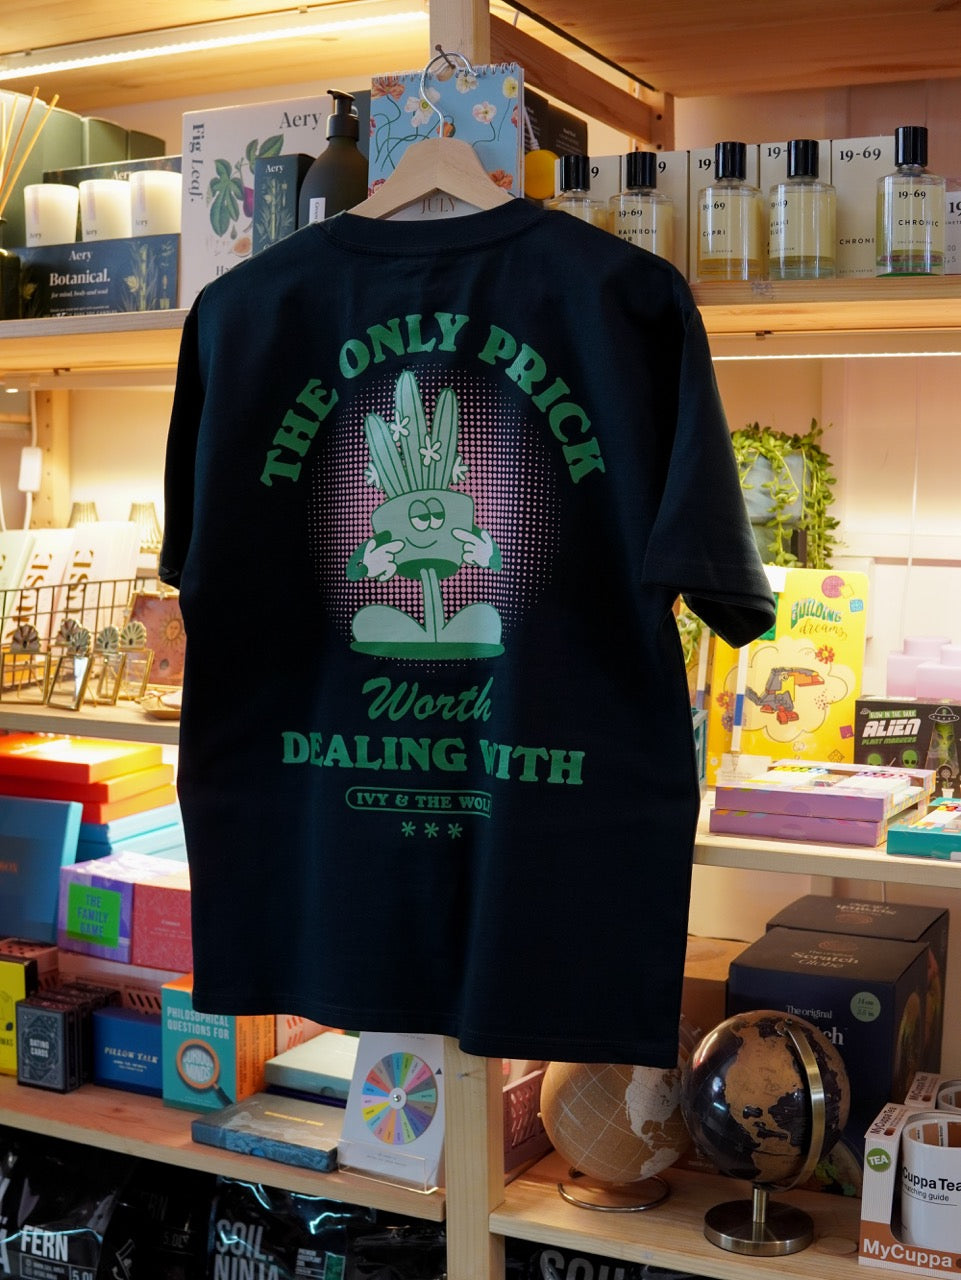 Pine Green "Only prick worth dealing with" T-Shirt